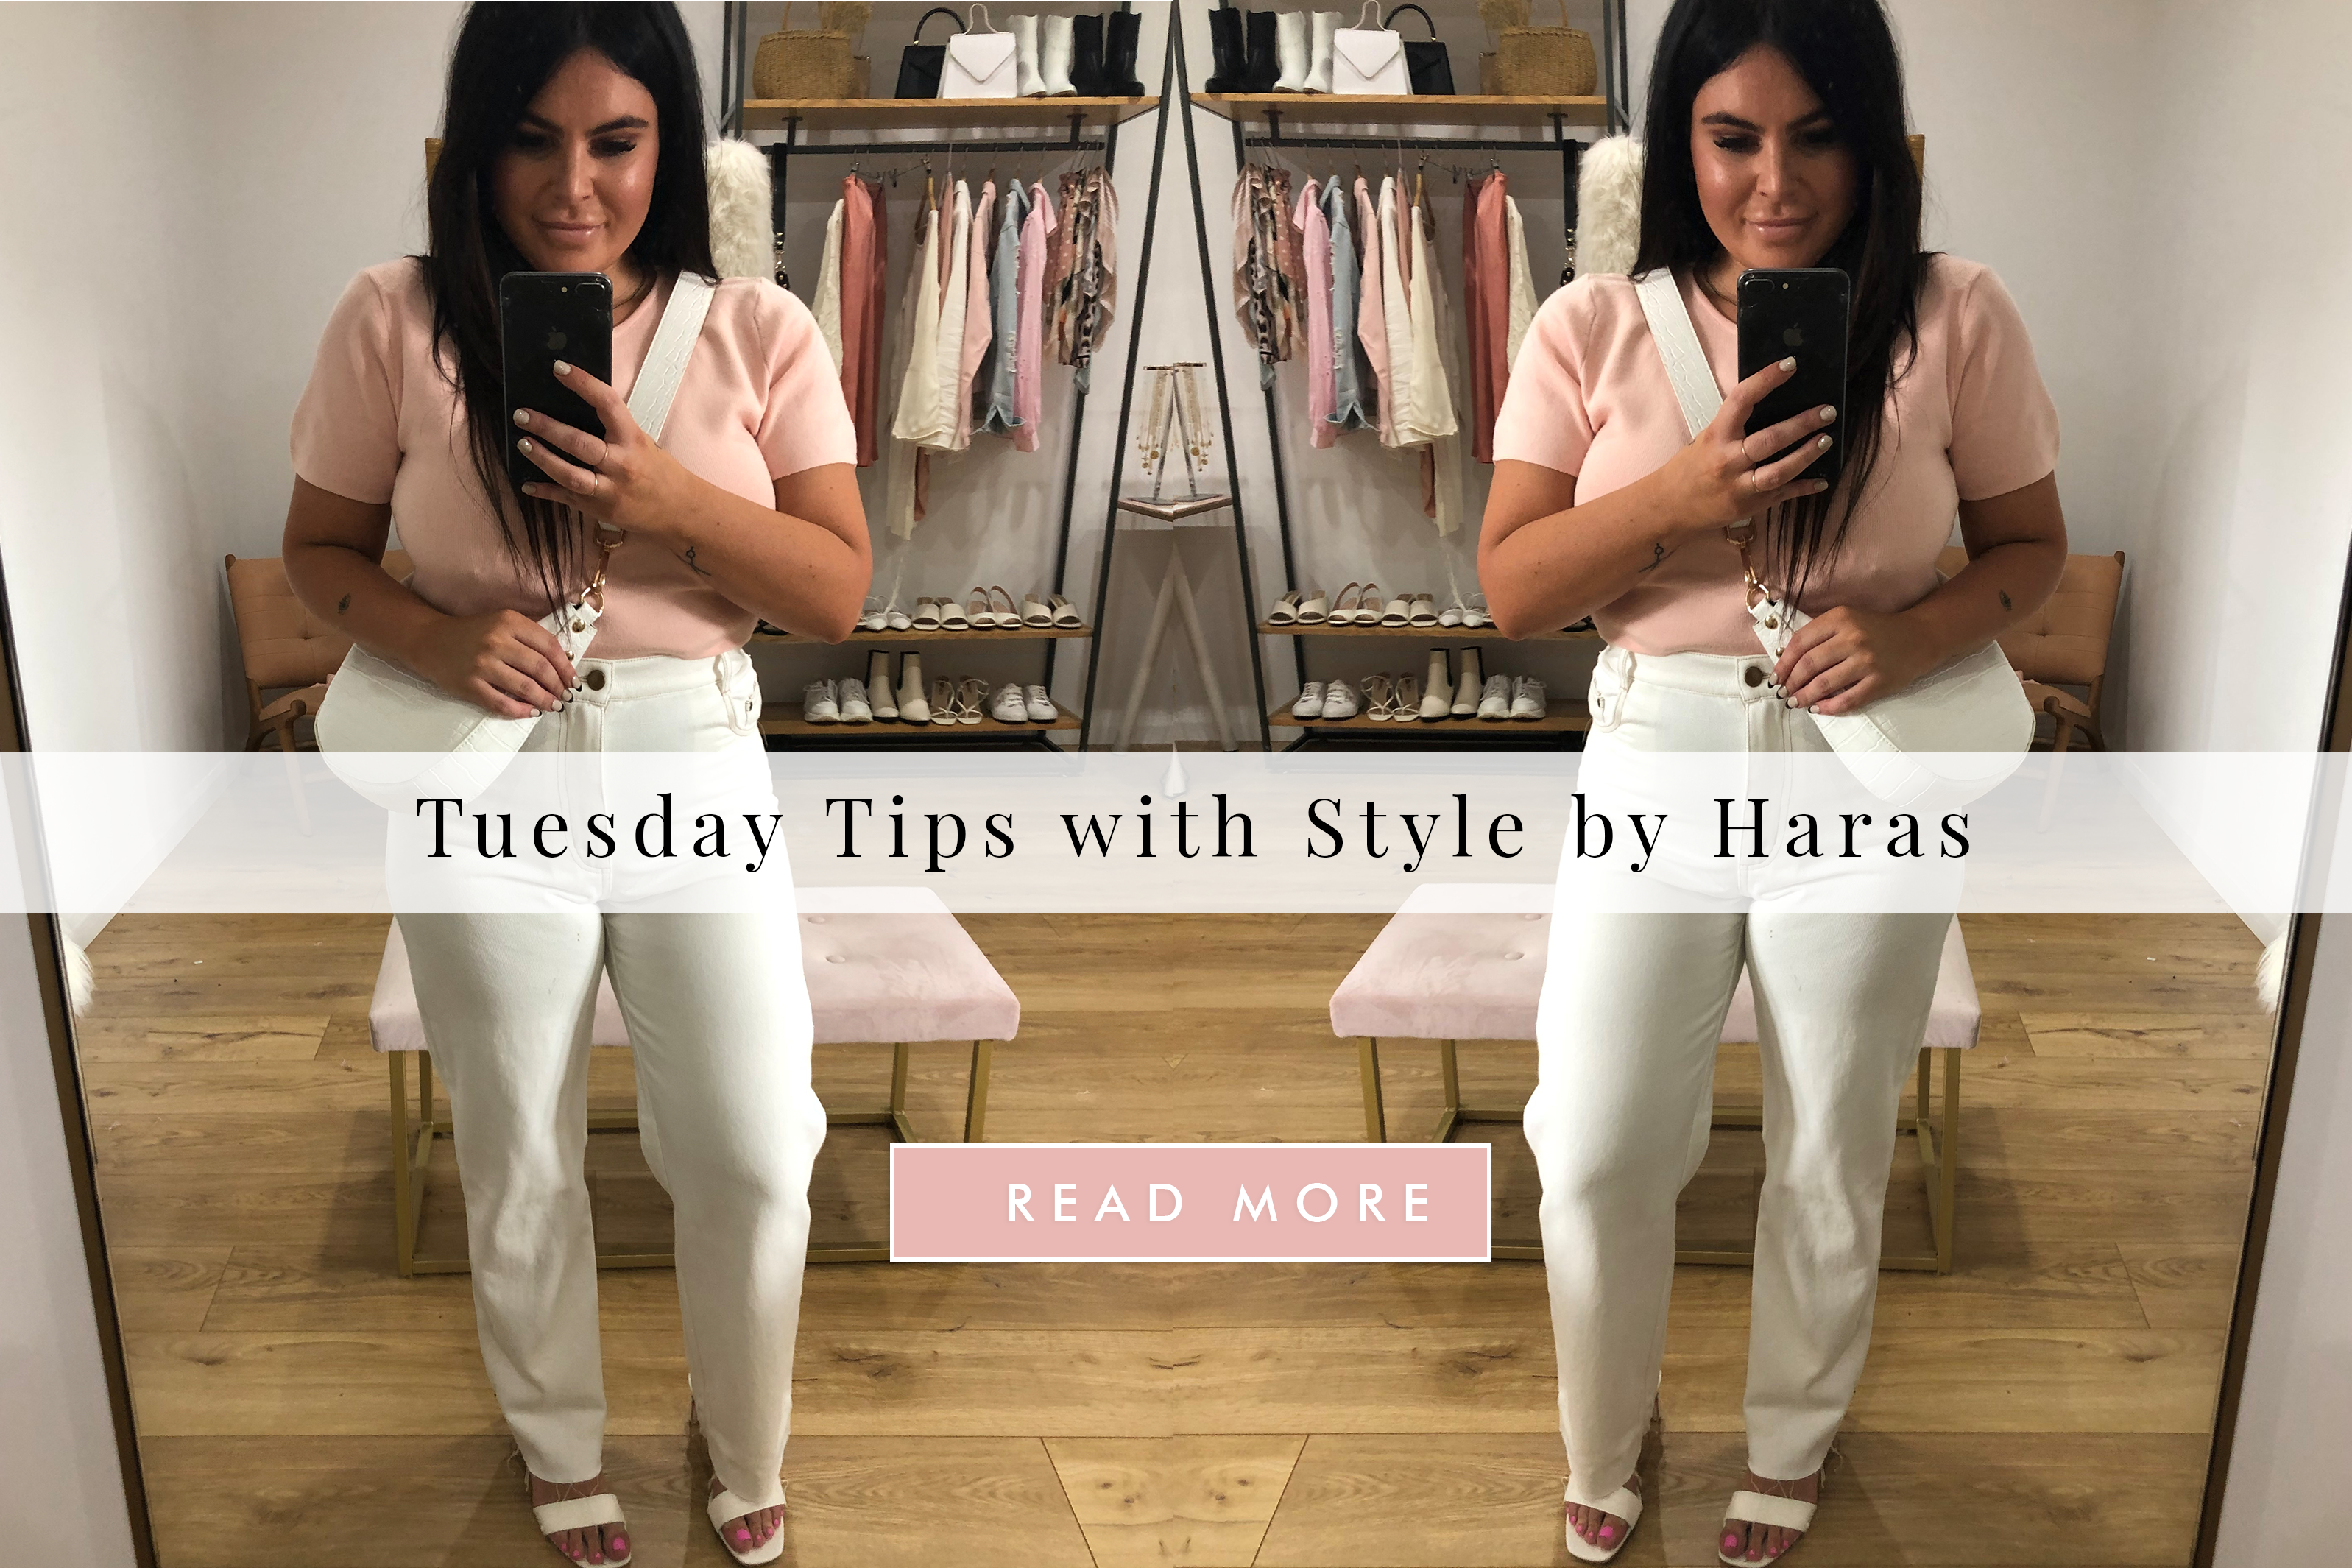 Tuesday Tips with Style by Haras